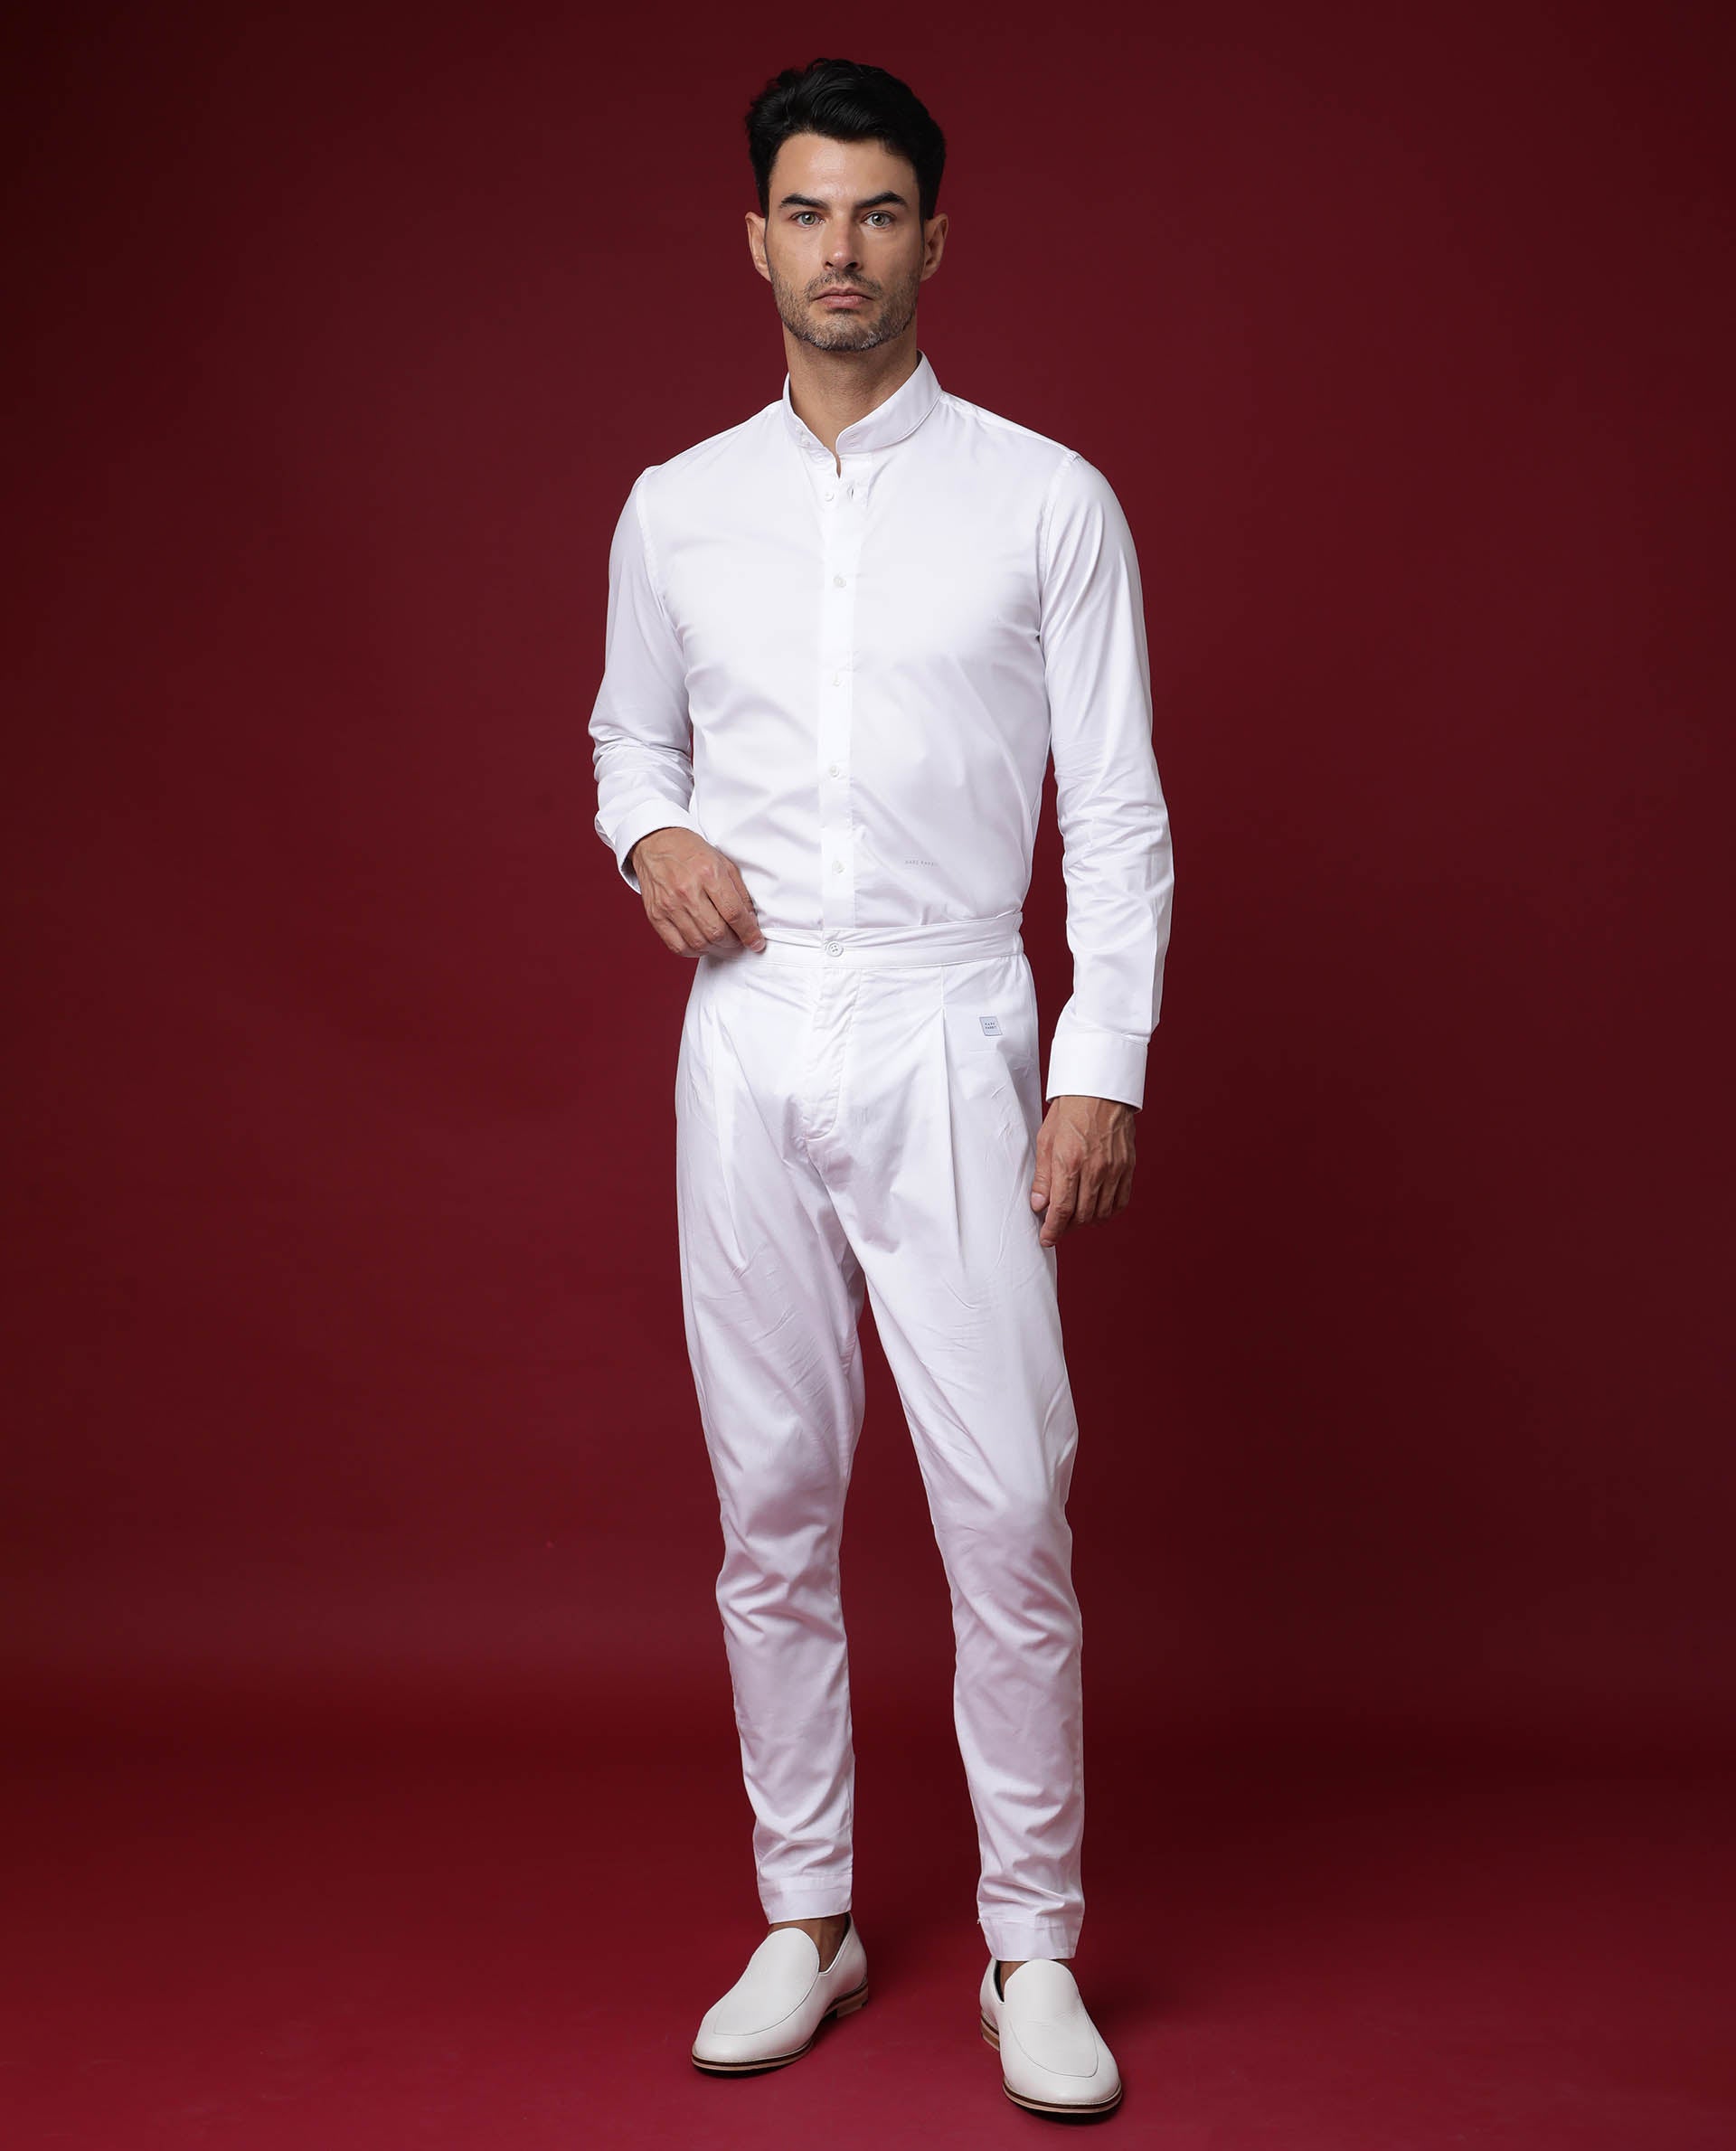 Man in white crew neck tshirt and white pants standing near brown wall  photo  Free White outfit Image on Unsplash